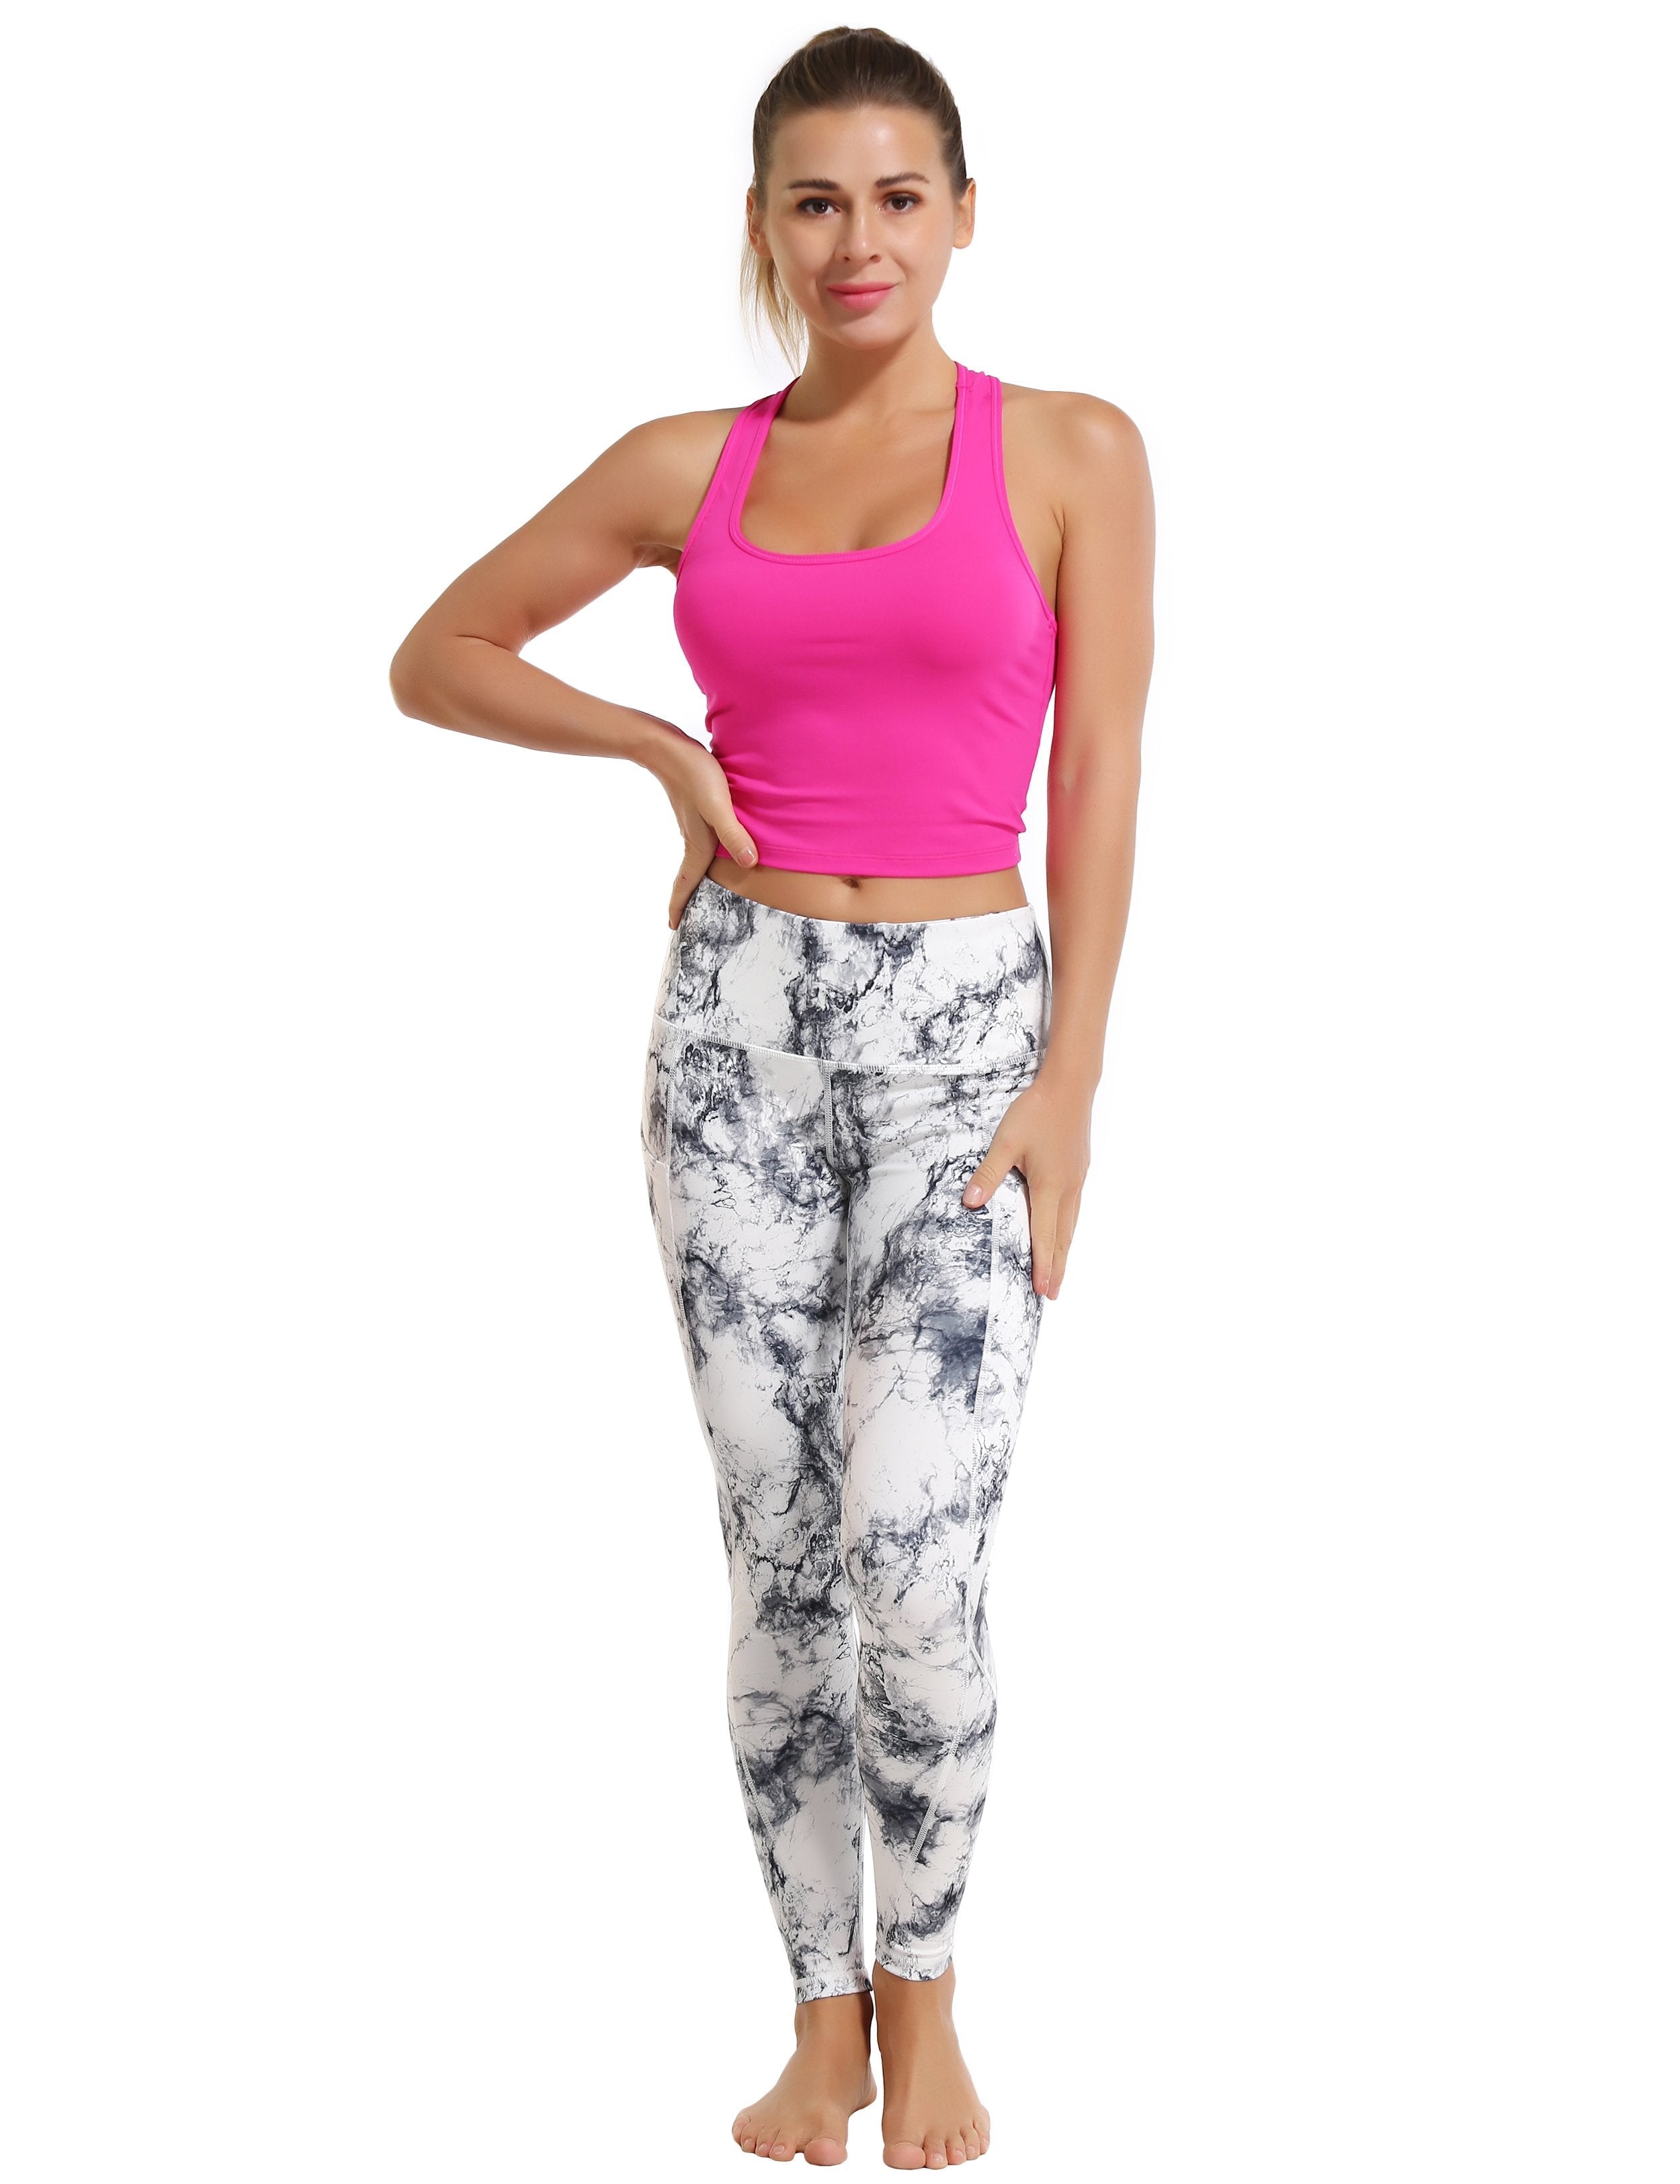 High Waist Side Pockets Pilates Pants arabescato 78%Polyester/22%Spandex Fabric doesn't attract lint easily 4-way stretch No see-through Moisture-wicking Tummy control Inner pocket